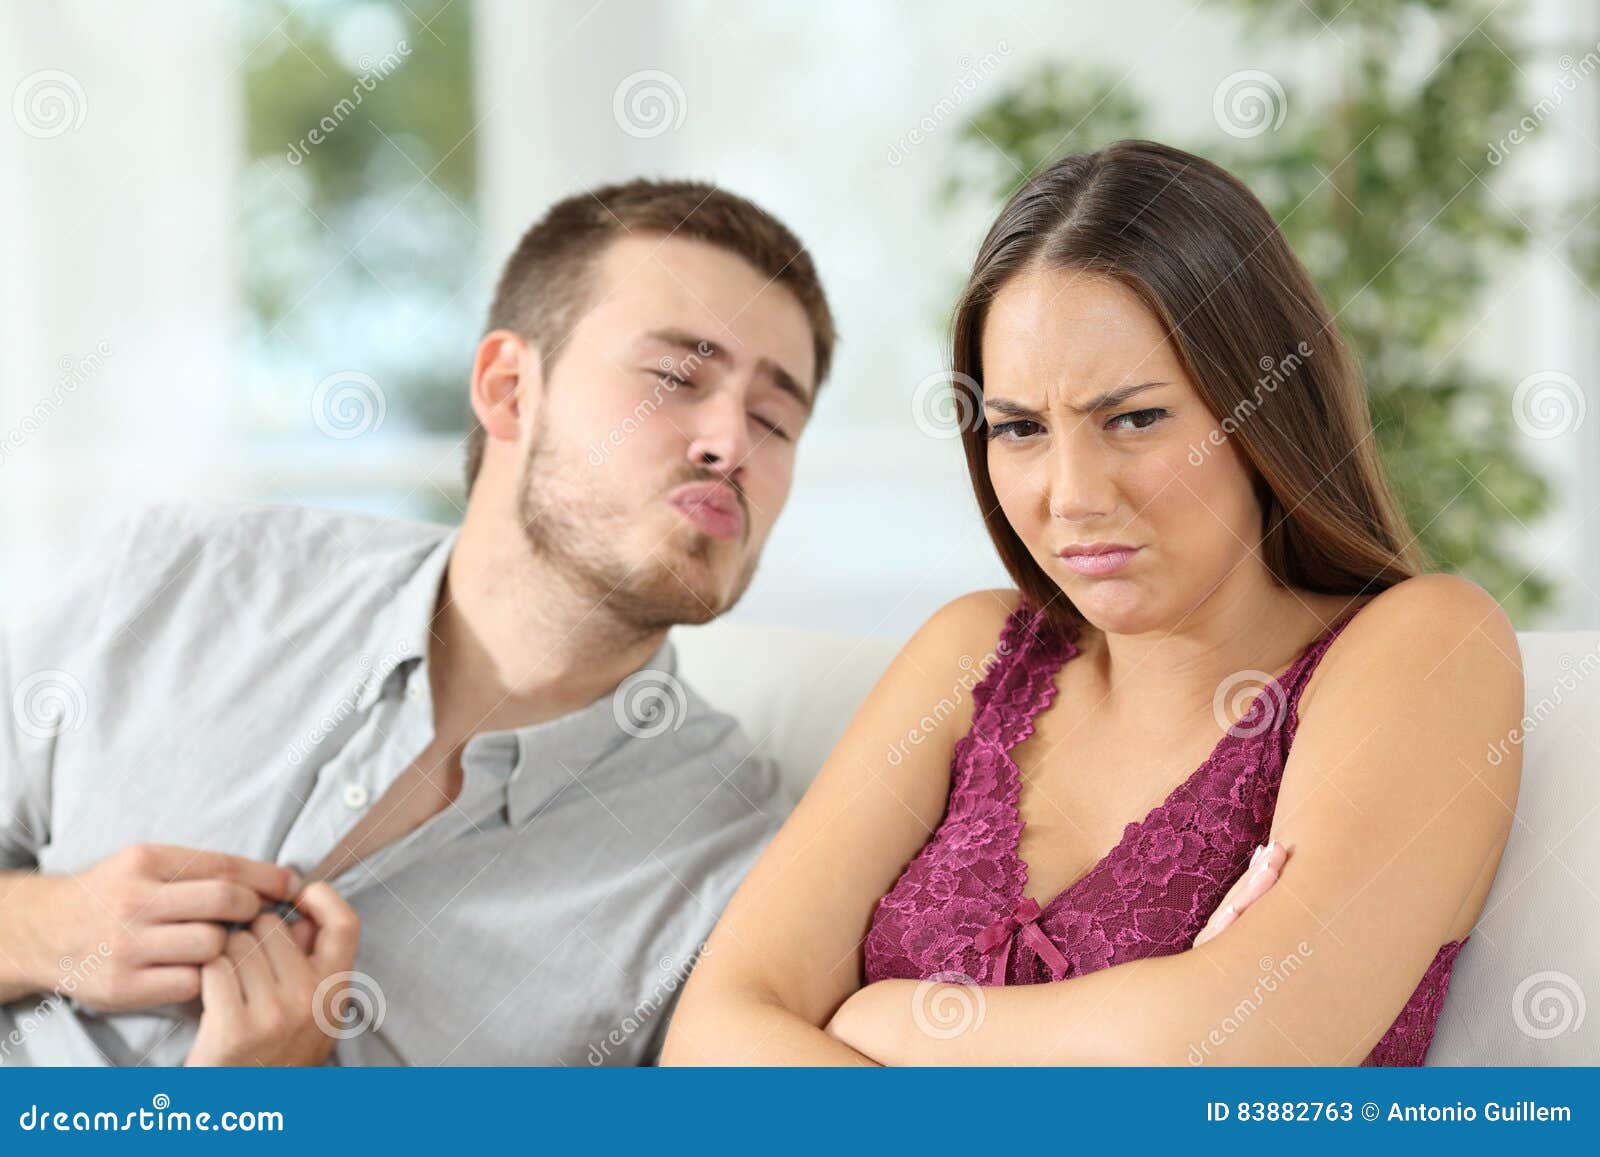 Angry Woman Rejecting a Sex Offer from Her Boyfriend Stock Image image